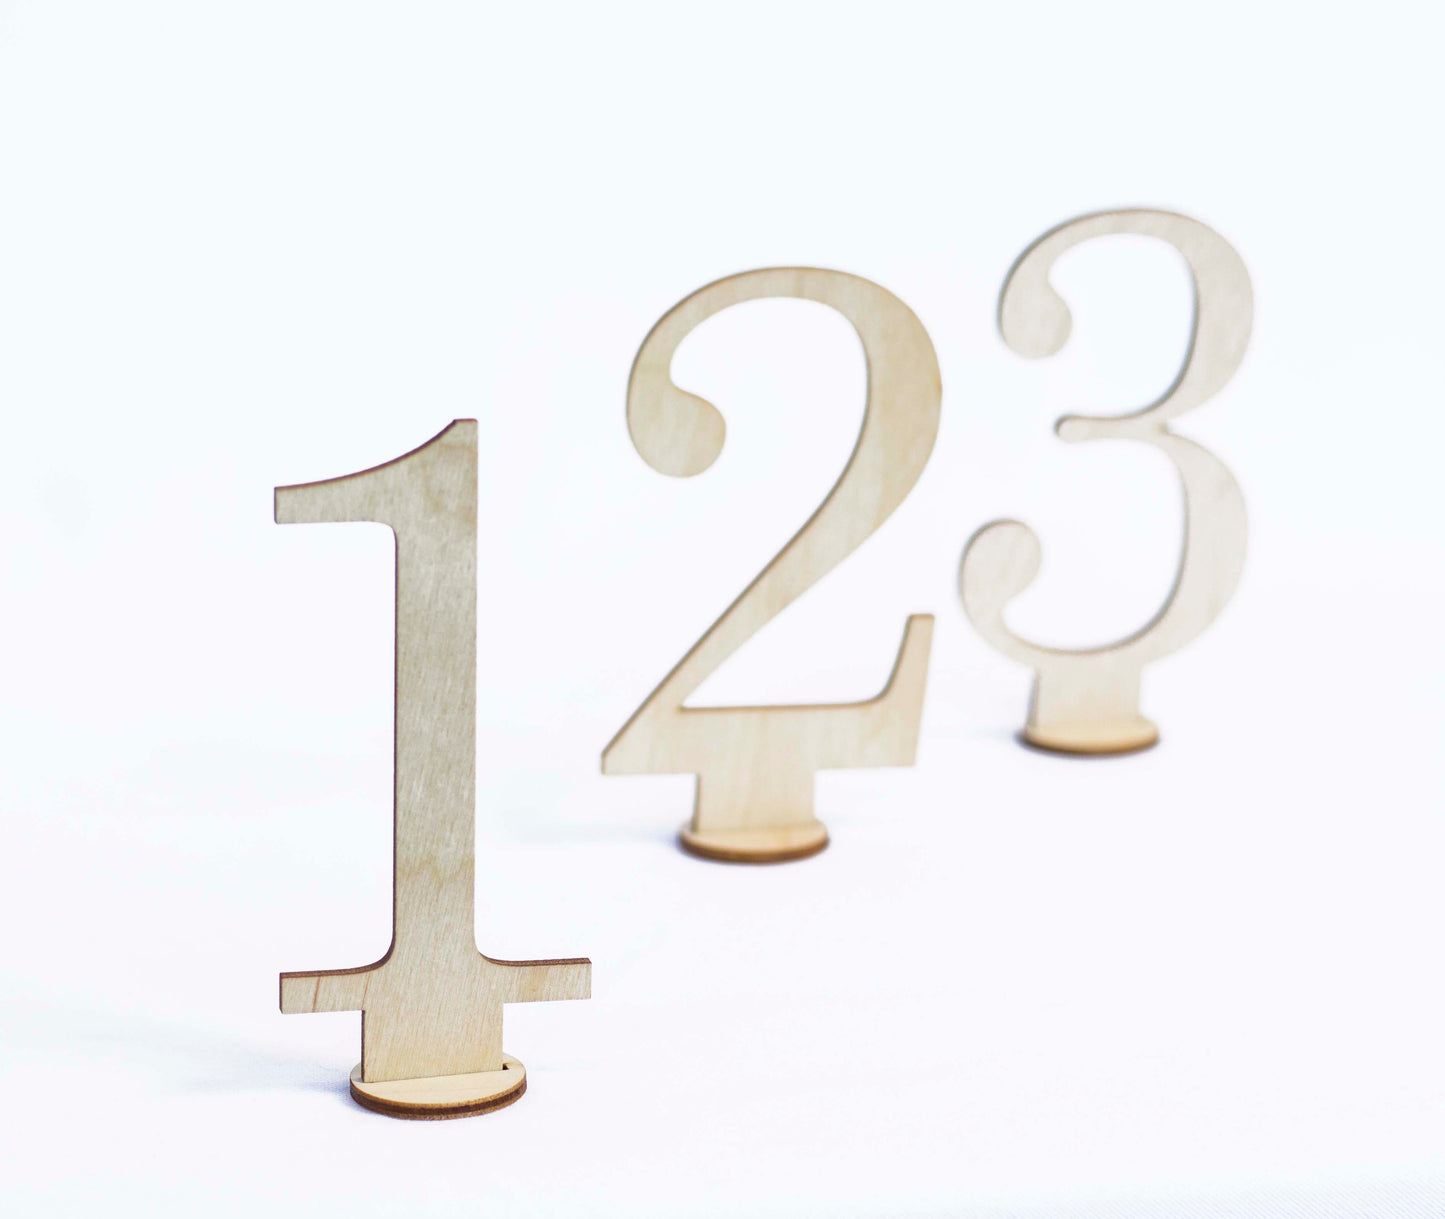 Wooden table numbers 1-10